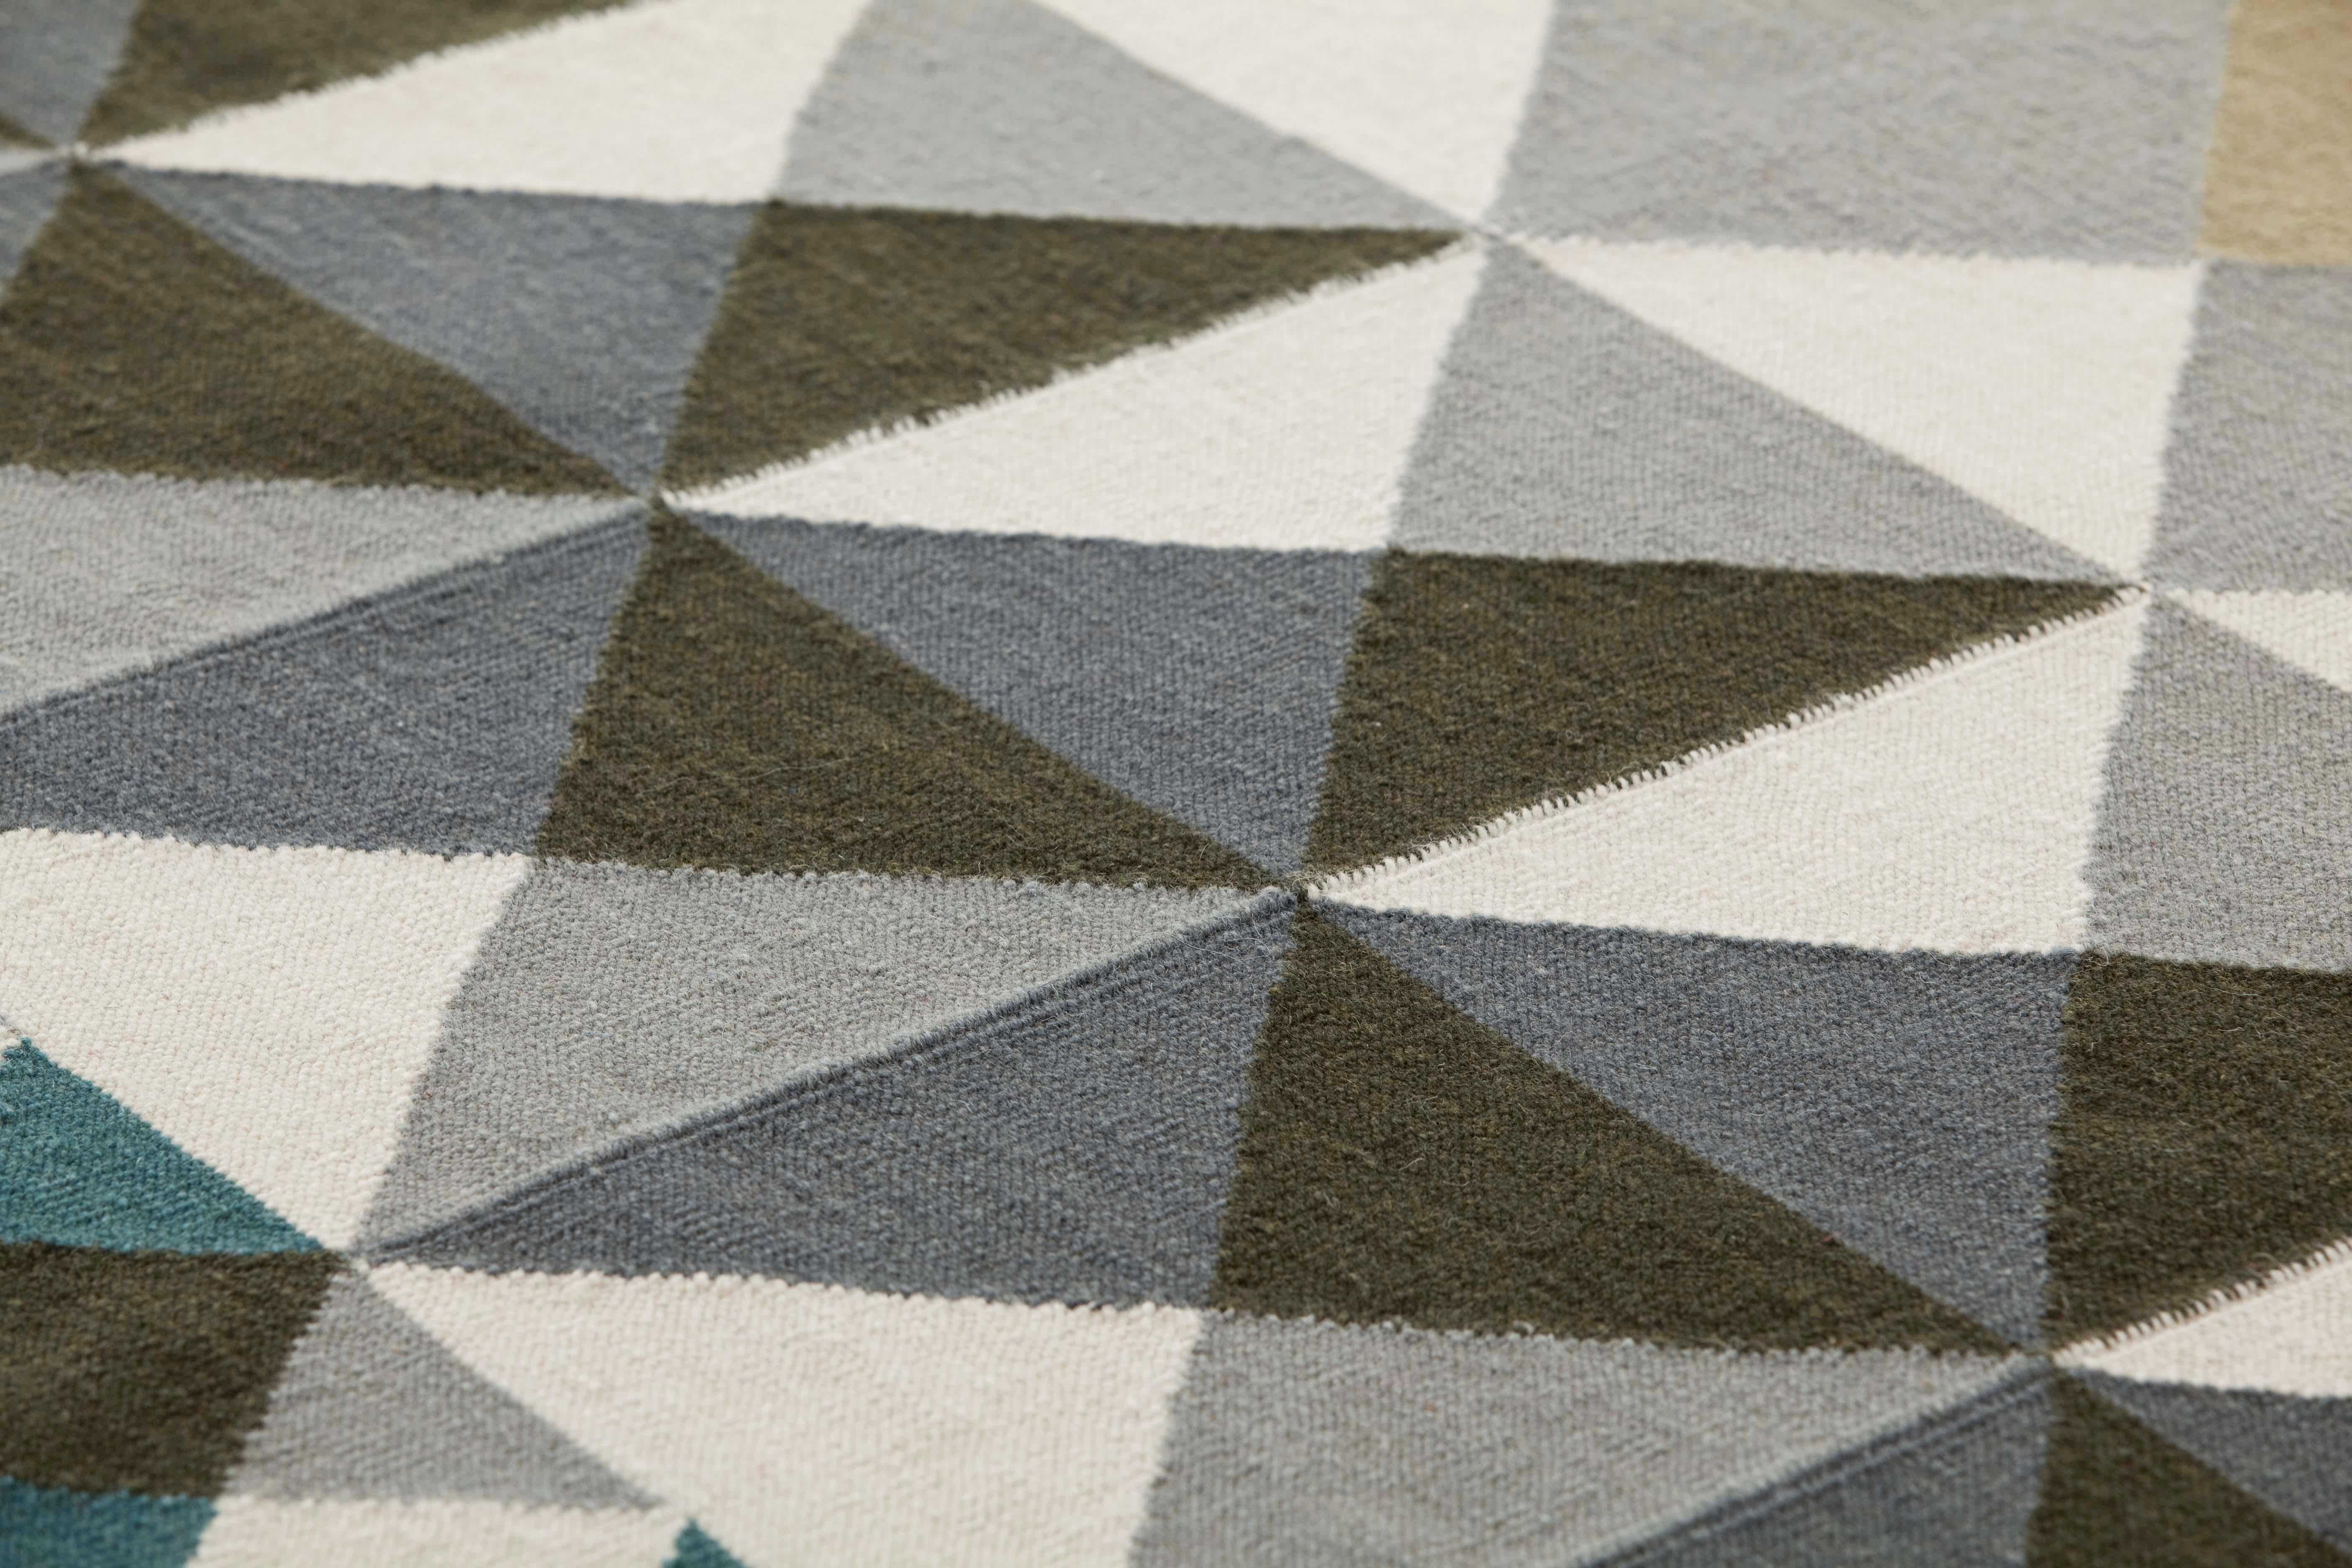 A basic rug, classic, practical, accessible... and now contemporary as well. Always in wool, reversible and obviously hand-made. 

Additional Information:
Material: 100% wool
Color: Grey
Technique: Kilim
Dimensions: 95 W x 67 D x 0.24 H